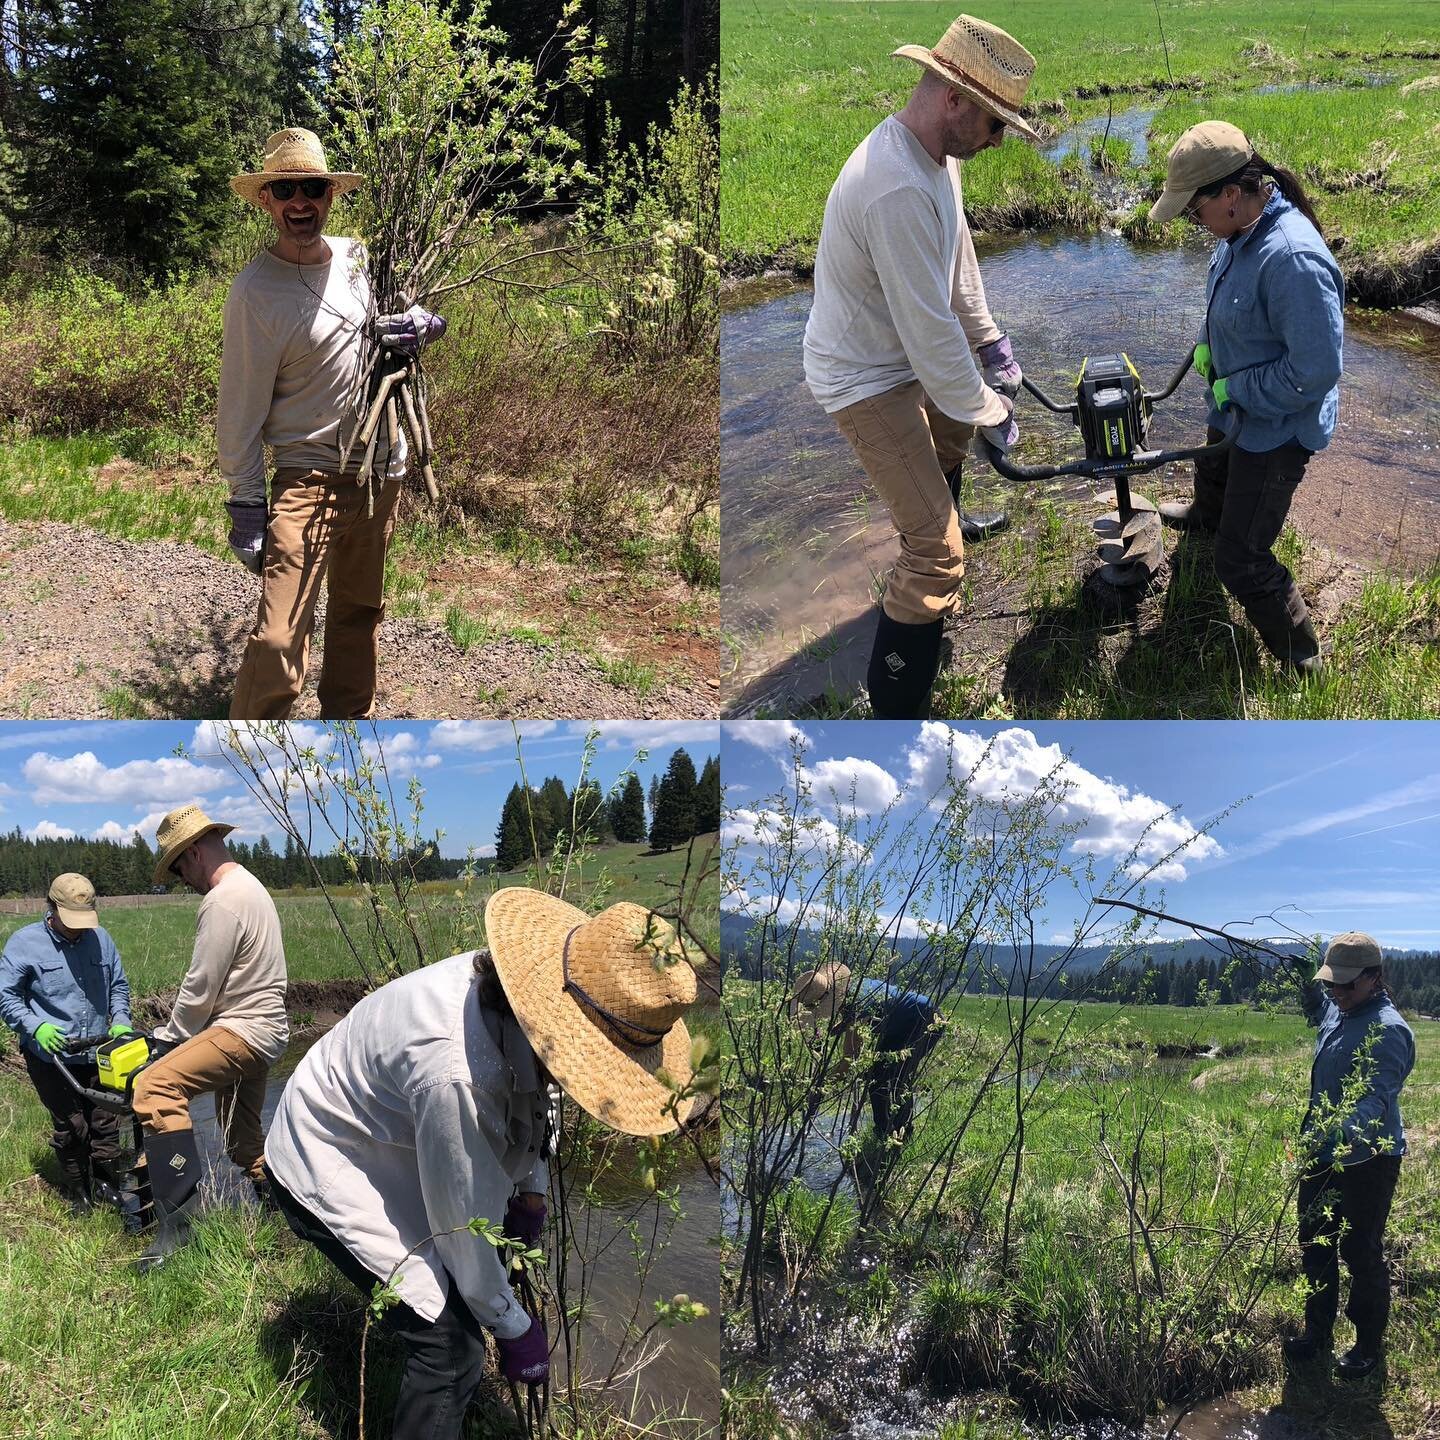 Work Outside Wednesday (with Willow 🌿✨) was a wonderful success today! 

From gathering to planting it was a full day and when we were done, another section of the meadow now has willow restored. 

Grateful for the many hands (and smiles) that make 